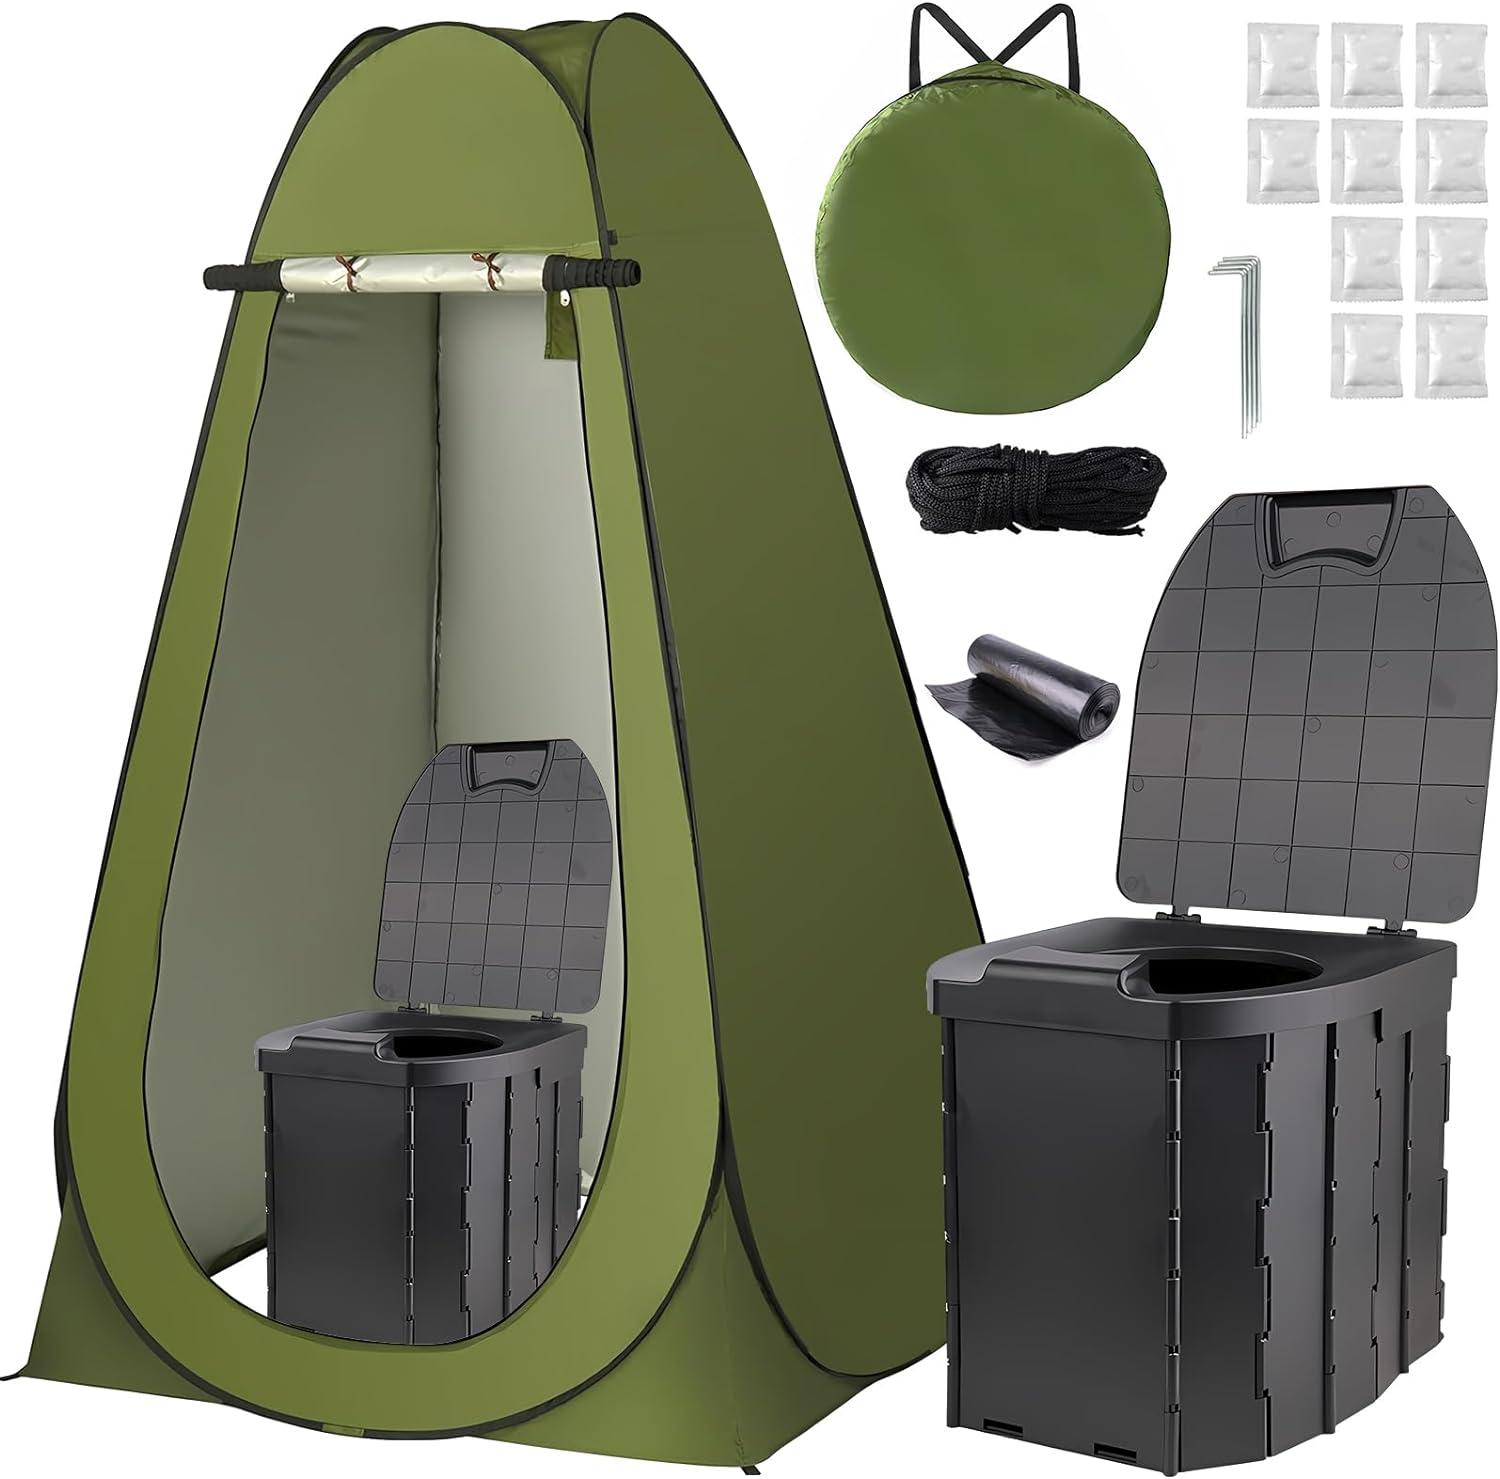 Portable  X Large Toilet and Privacy Pop Up Tent for Adults, Retail $70.00